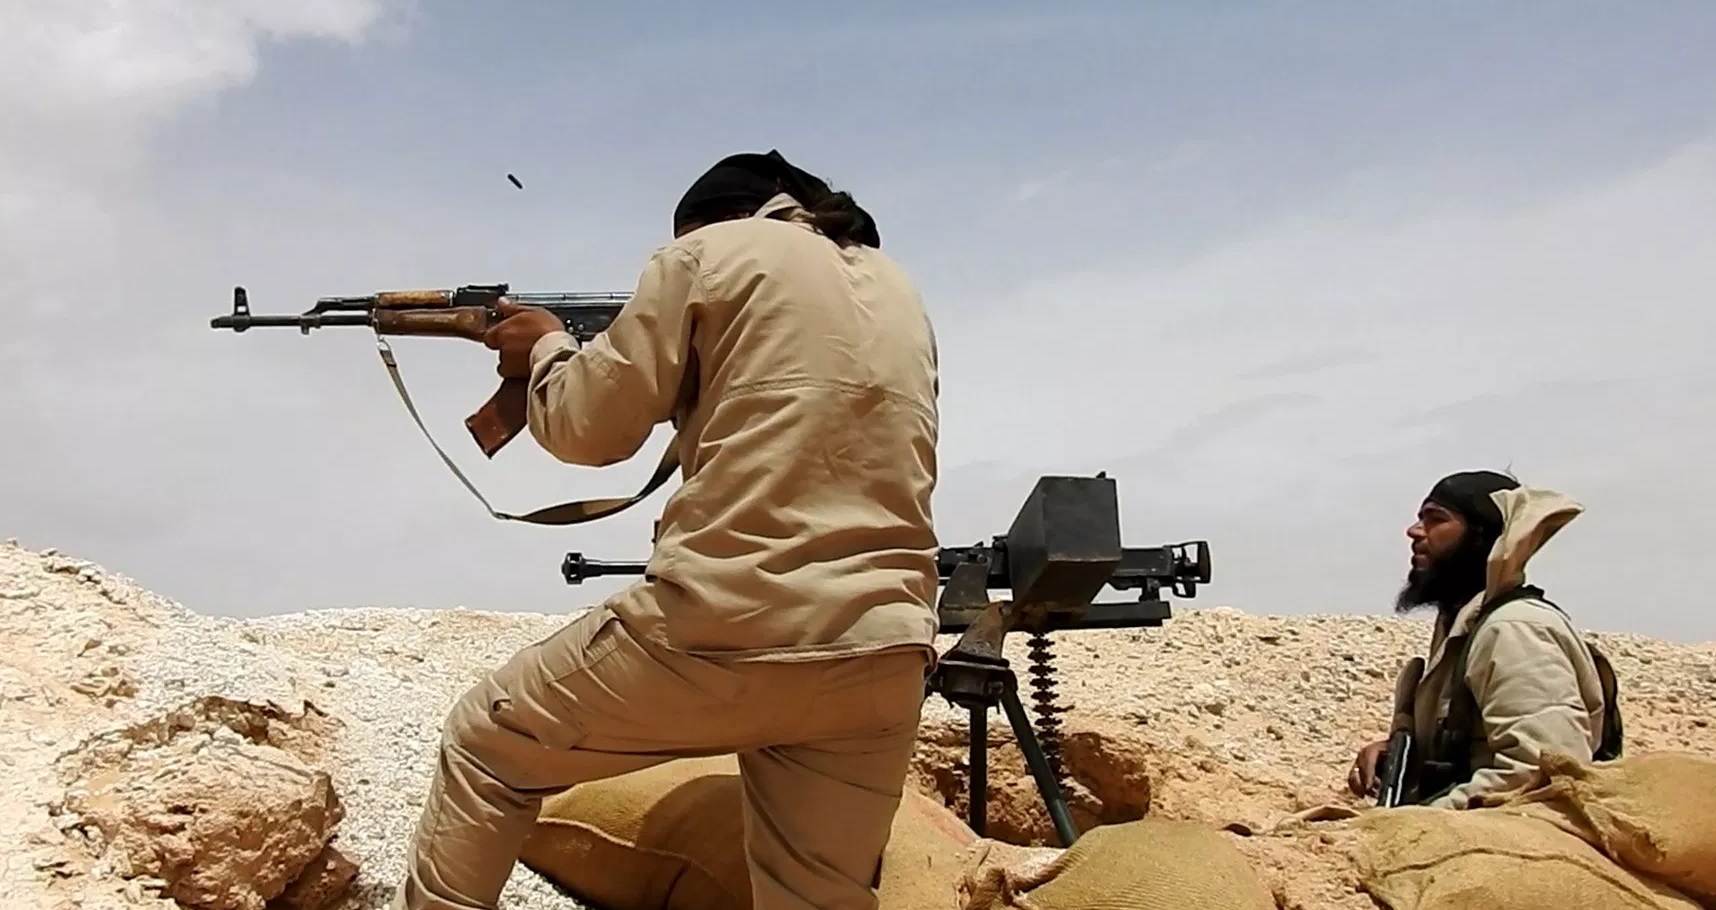 ISIS Ambushes Unit Of Syrian Army Southeast Of Palmyra, Several Soldiers Killed And Injured